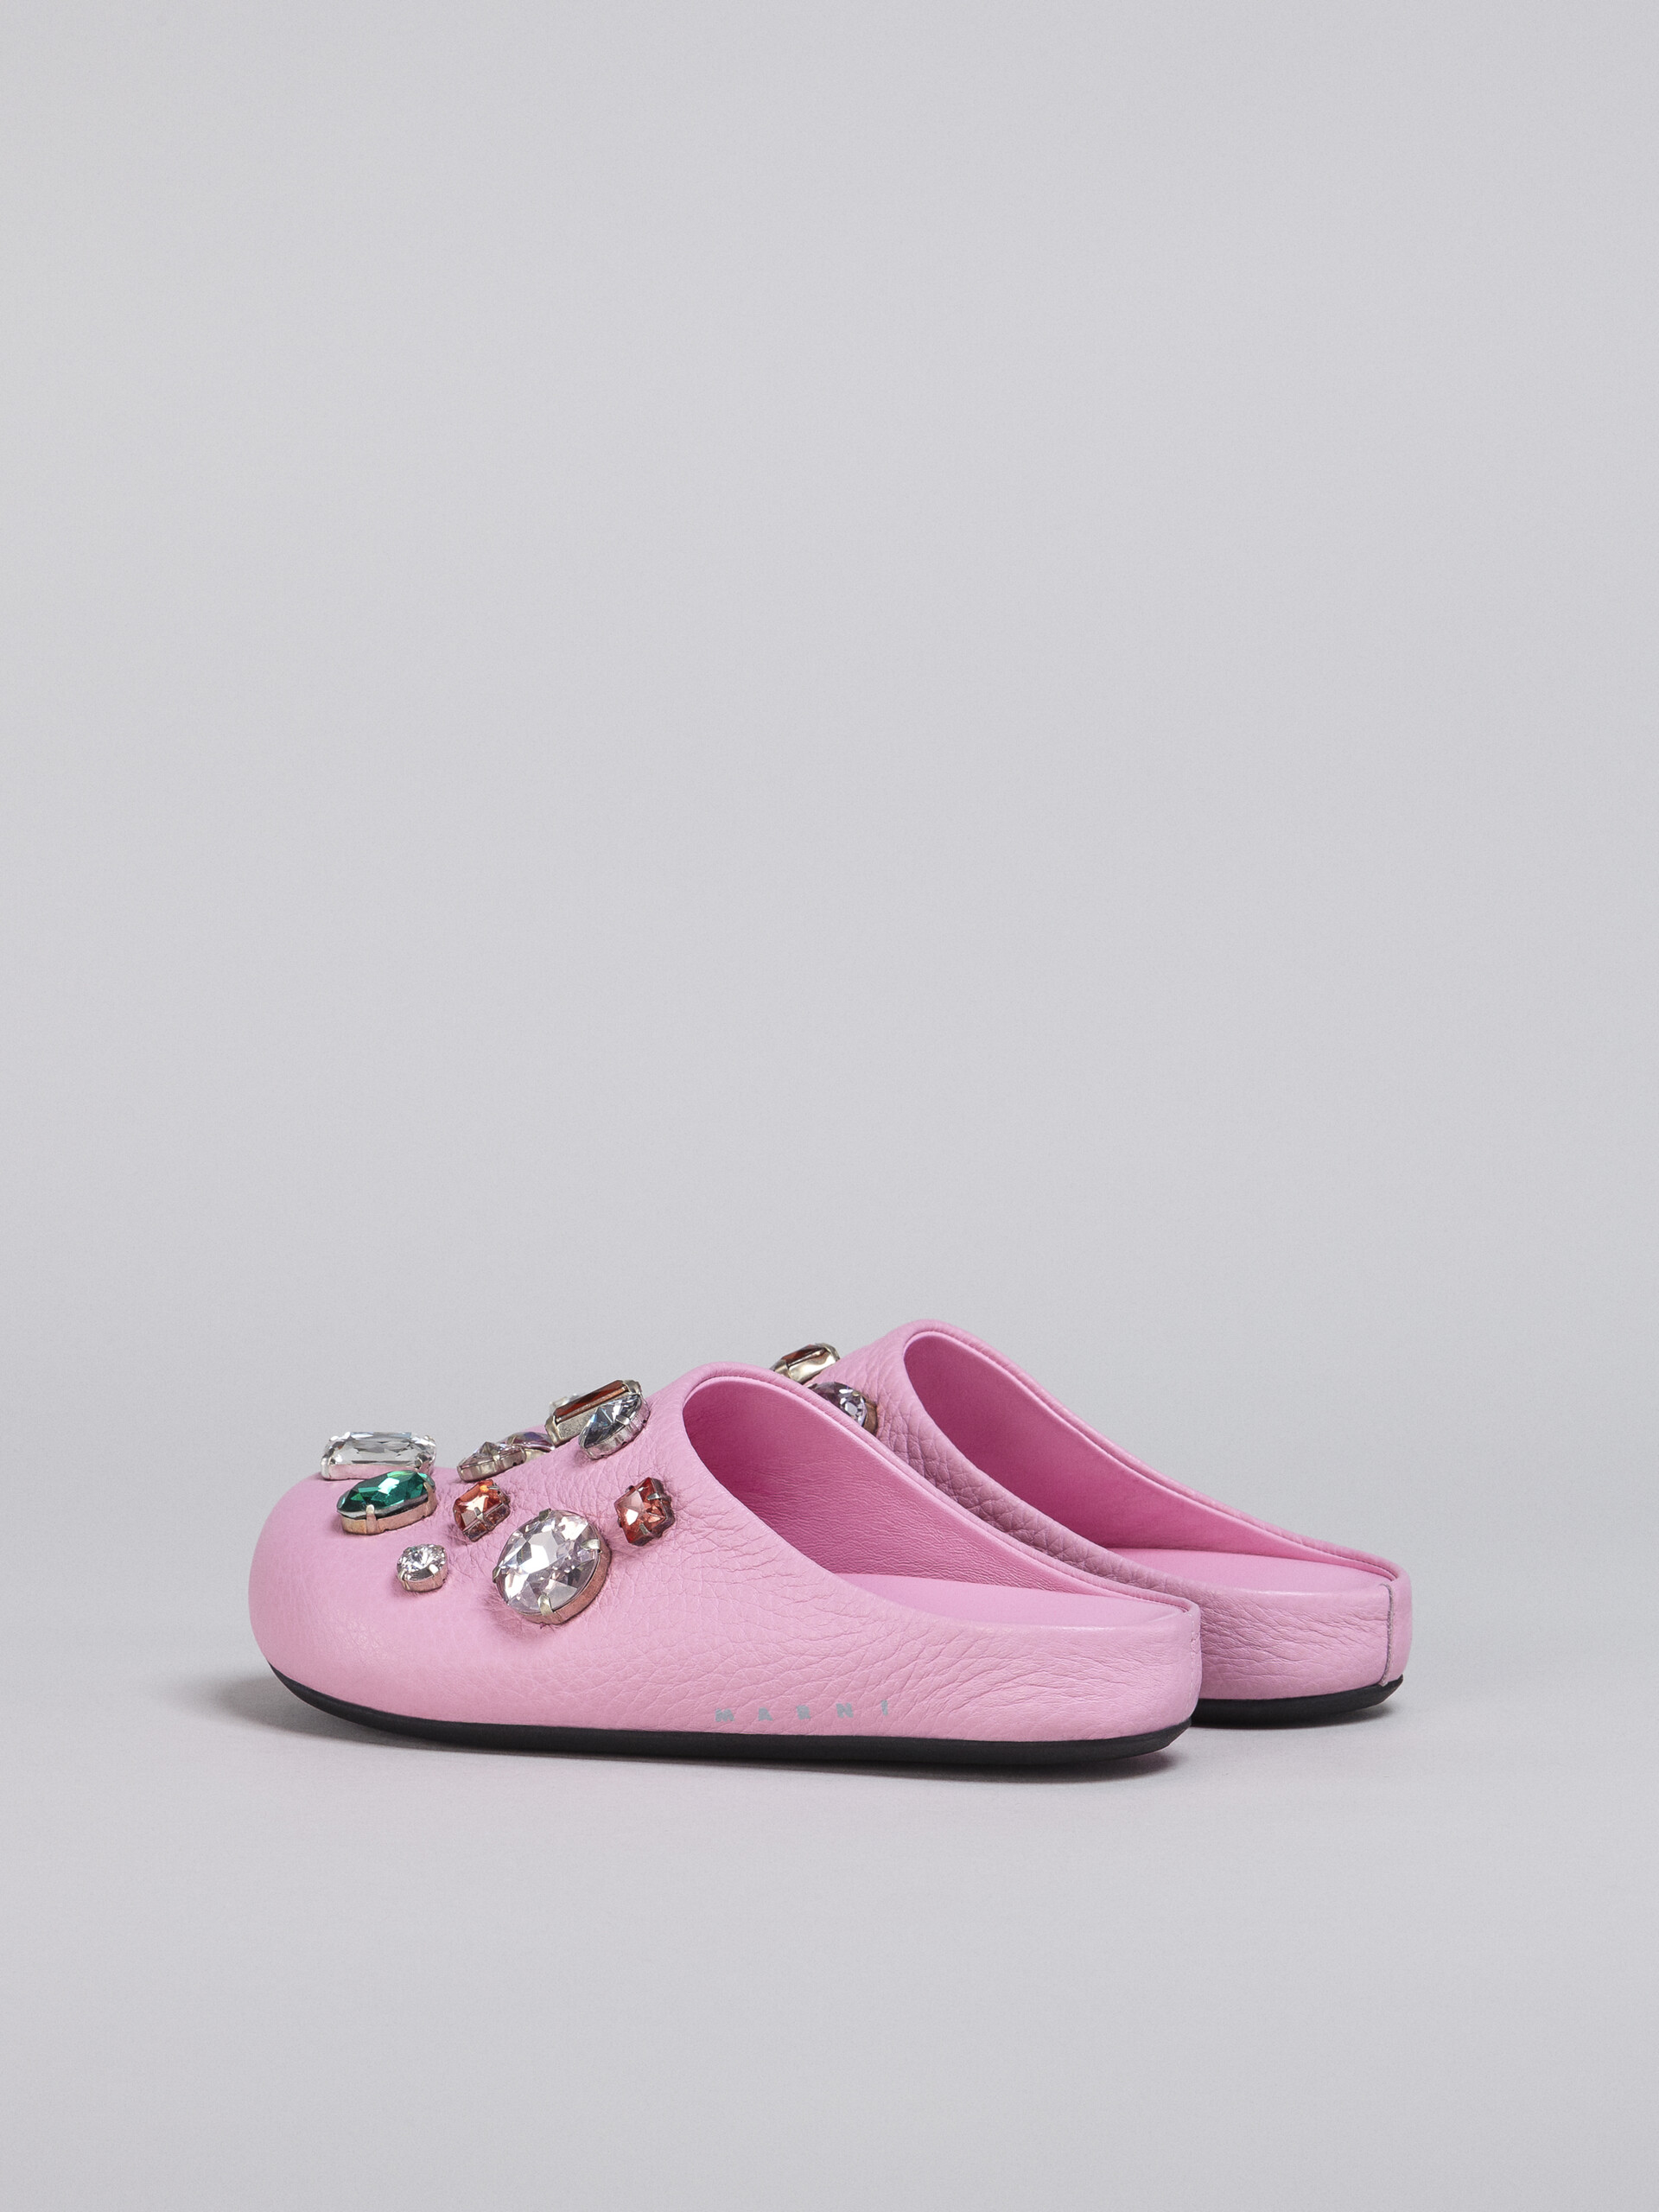 Pink leather Fussbett sabot with glass beads - Clogs - Image 3